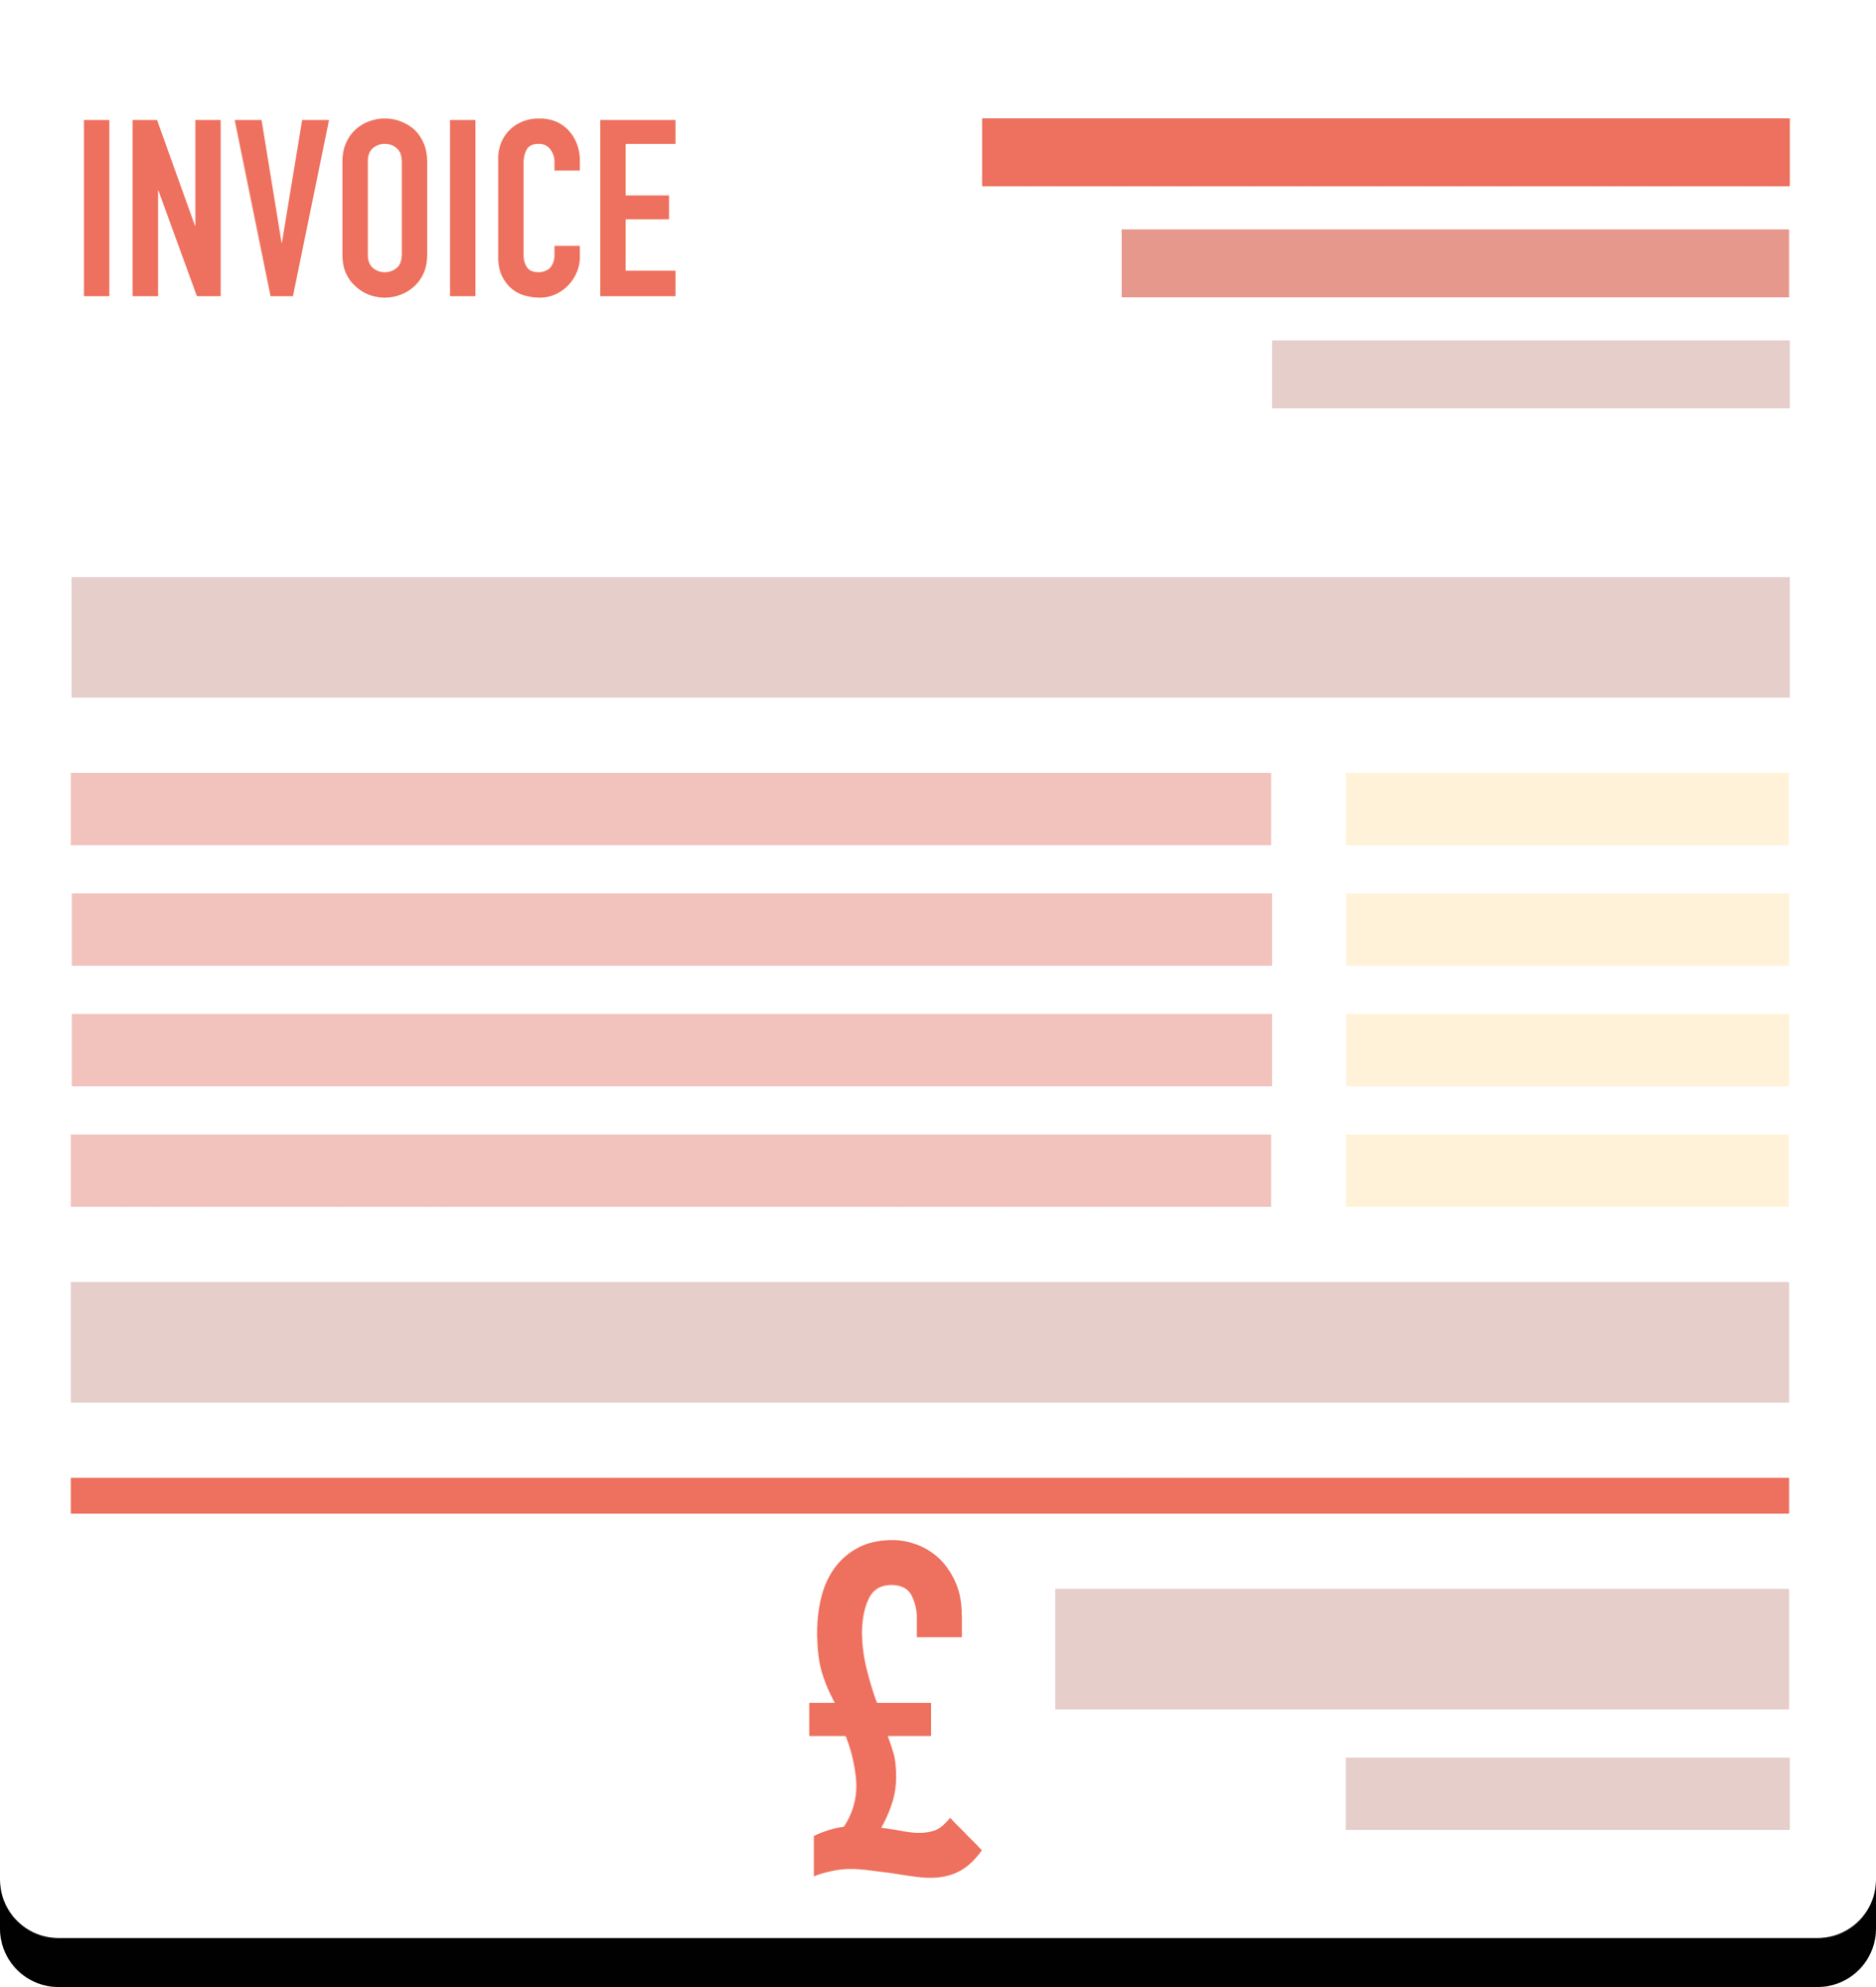 Invoice template for Landscaping